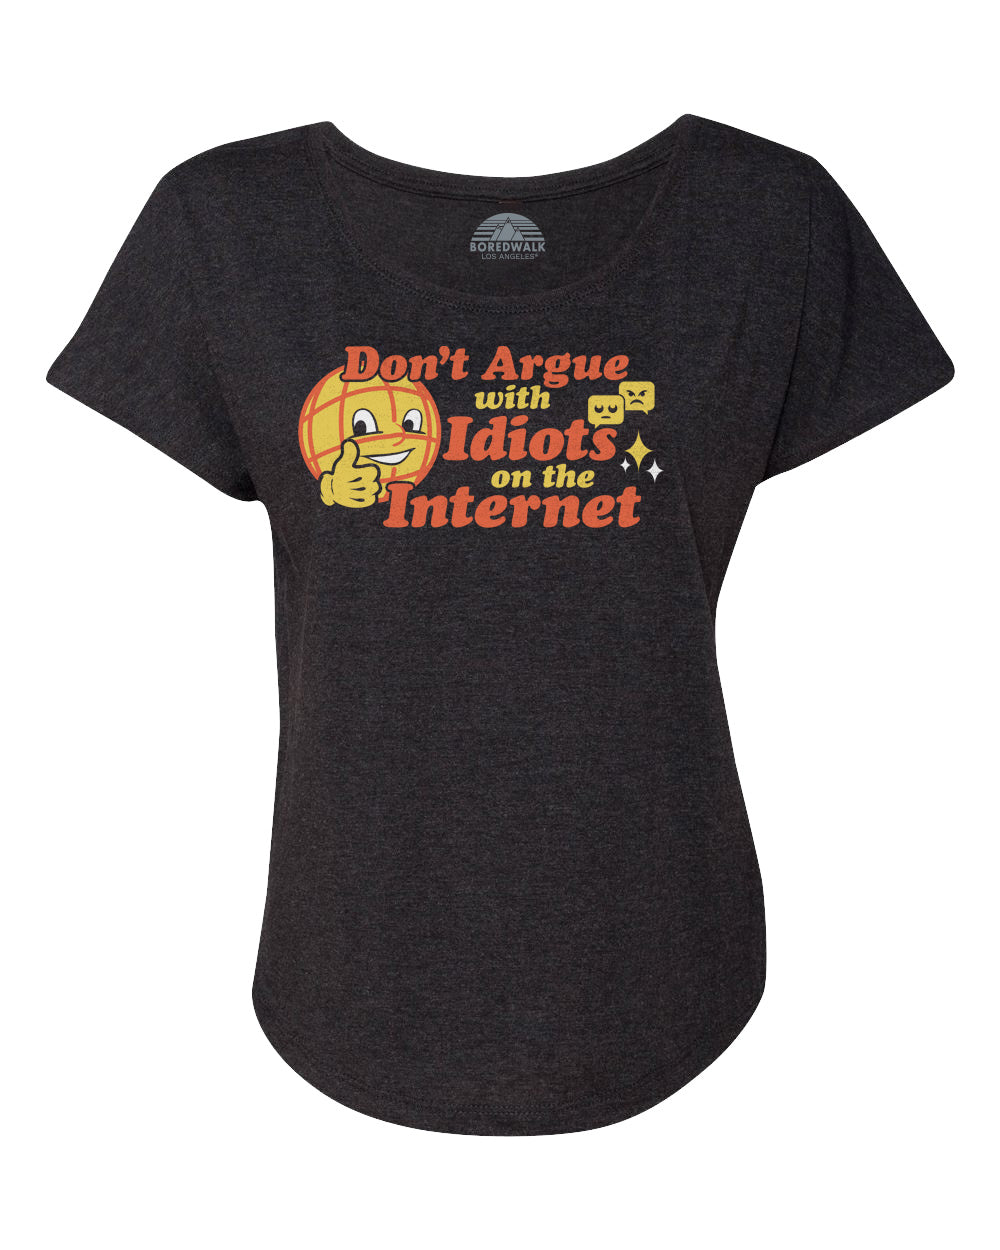 Women's Don't Argue With Idiots On The Internet Scoop Neck T-Shirt